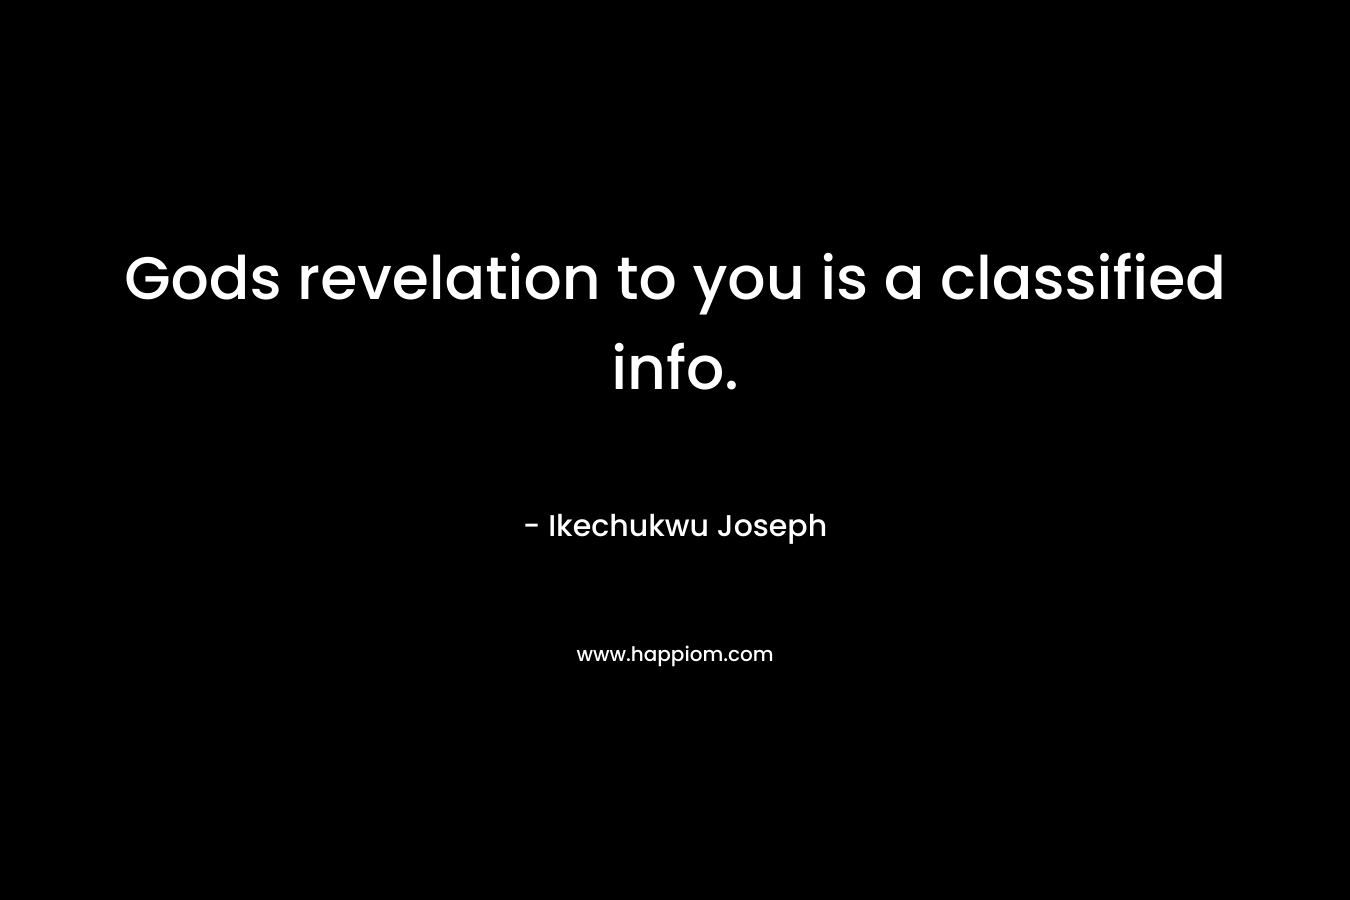 Gods revelation to you is a classified info.